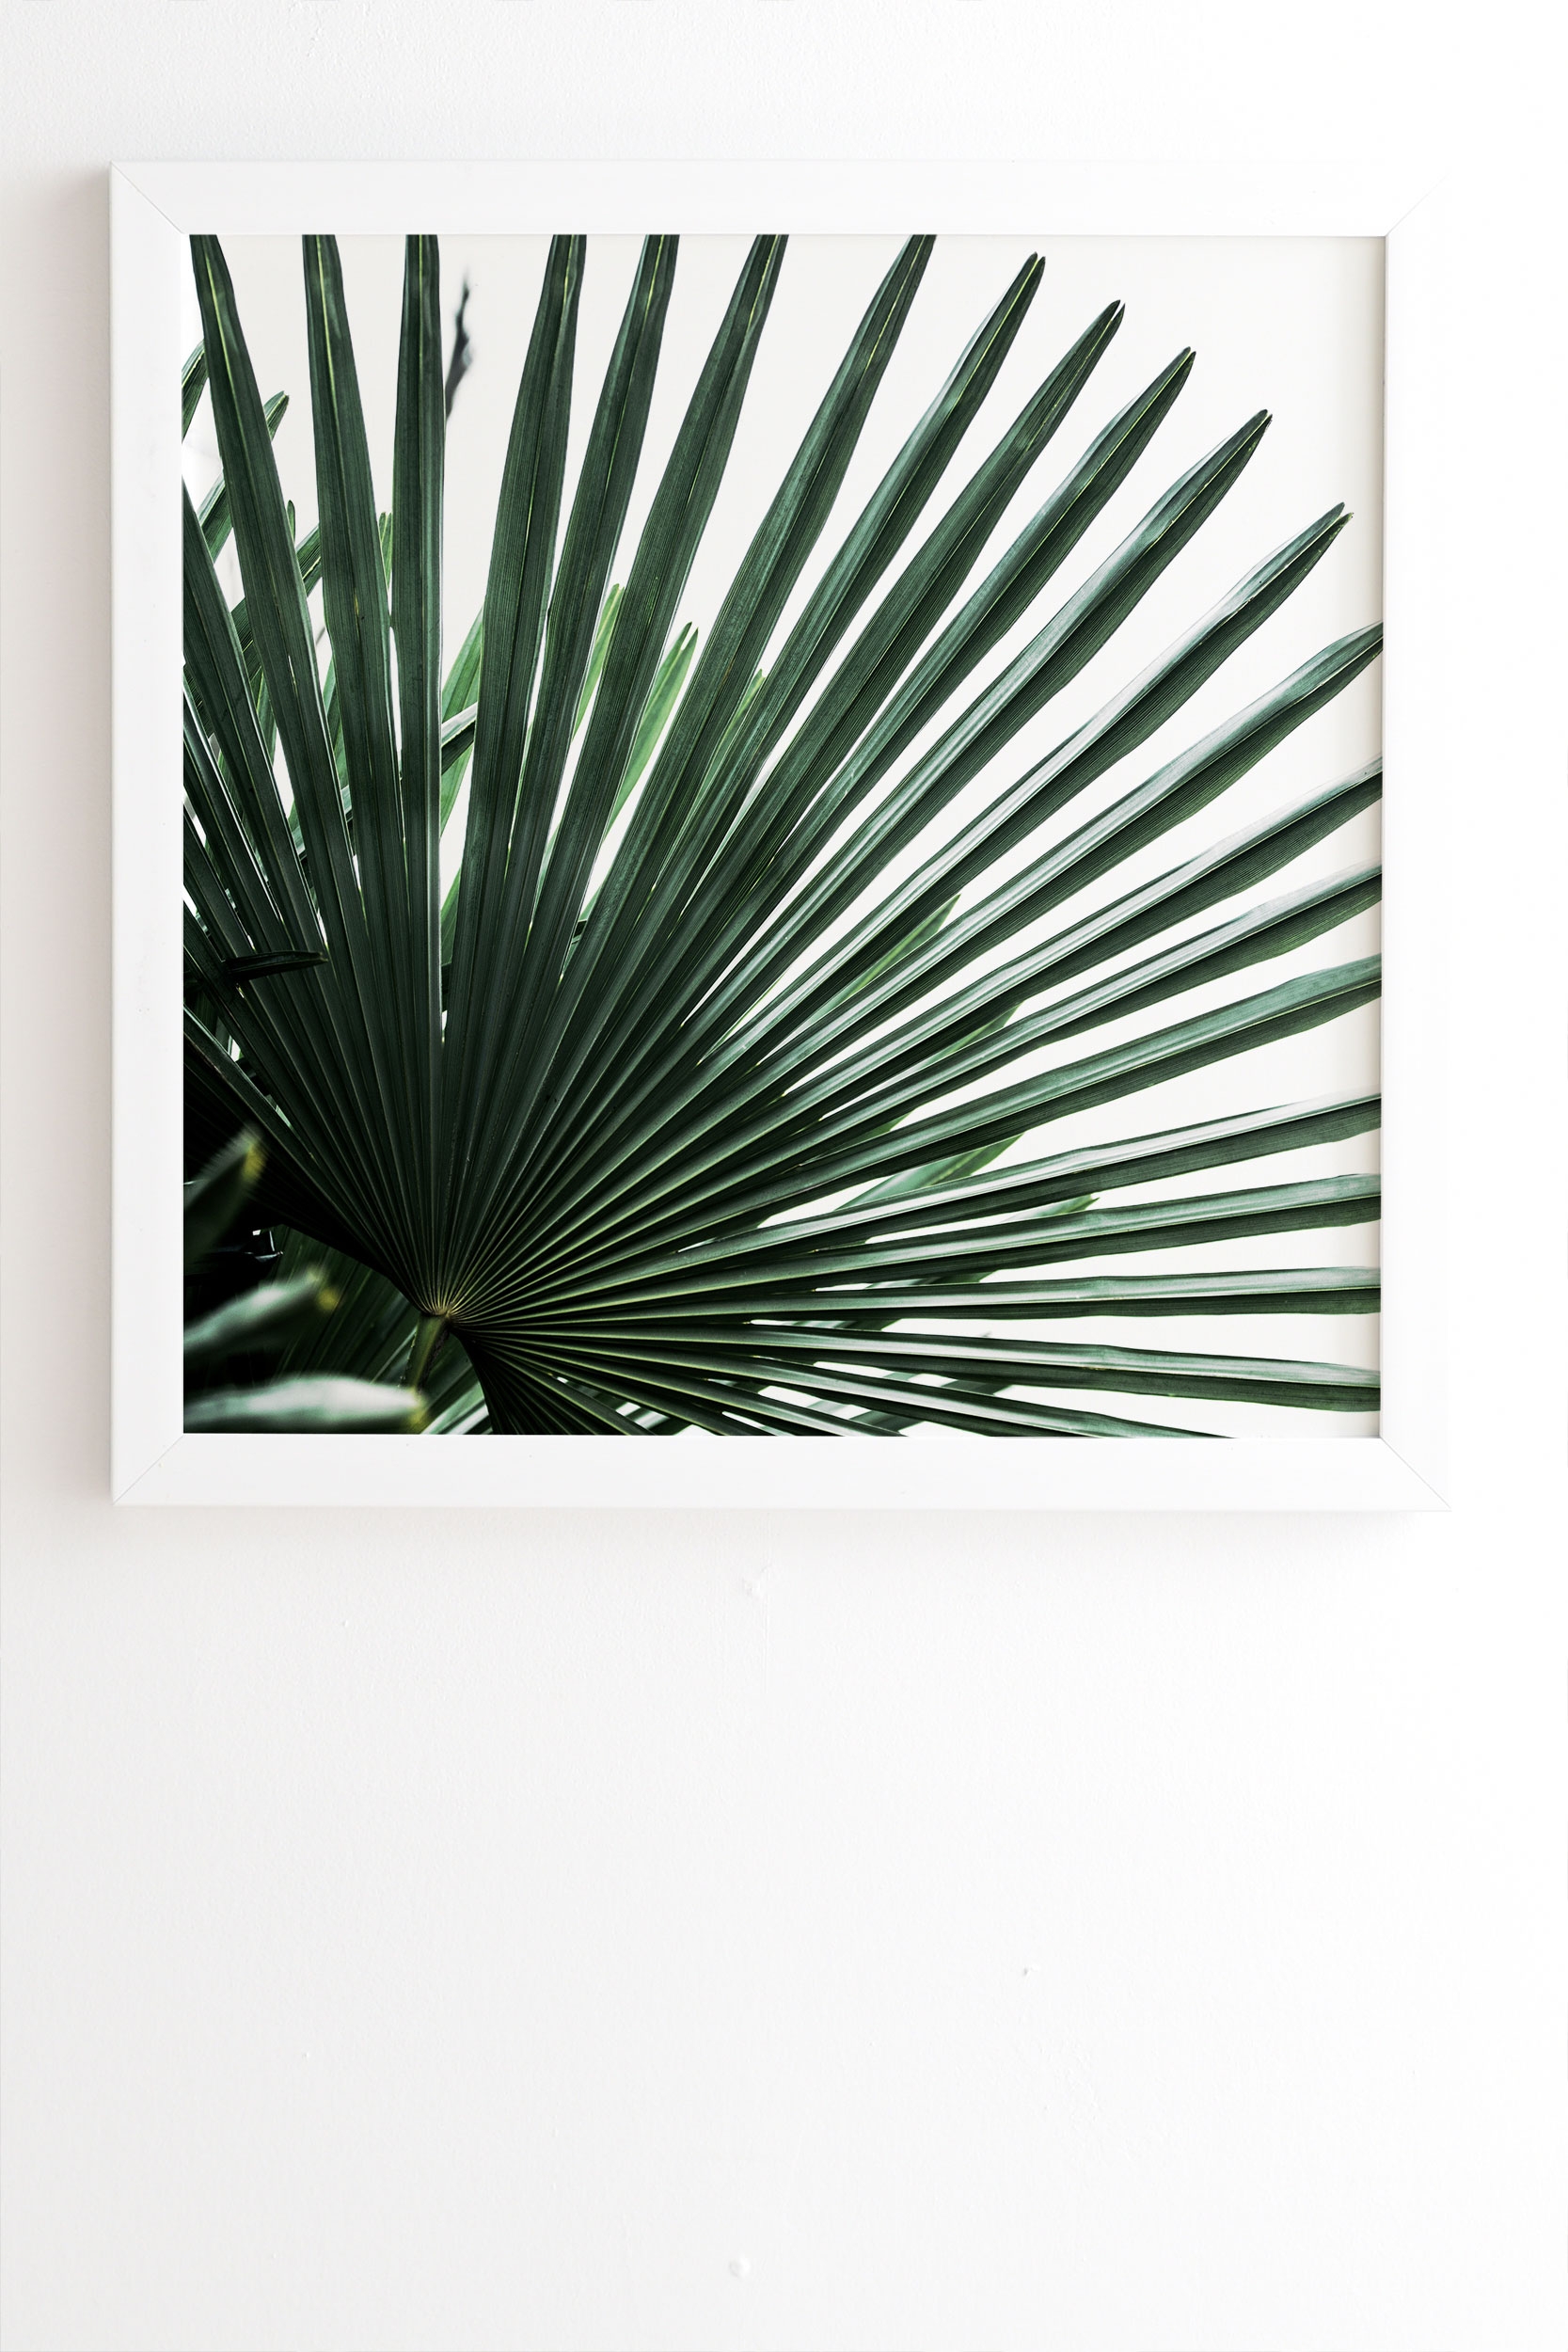 Palm Leaves 13 by Mareike Boehmer - Framed Wall Art Basic White 11" x 13" - Image 1